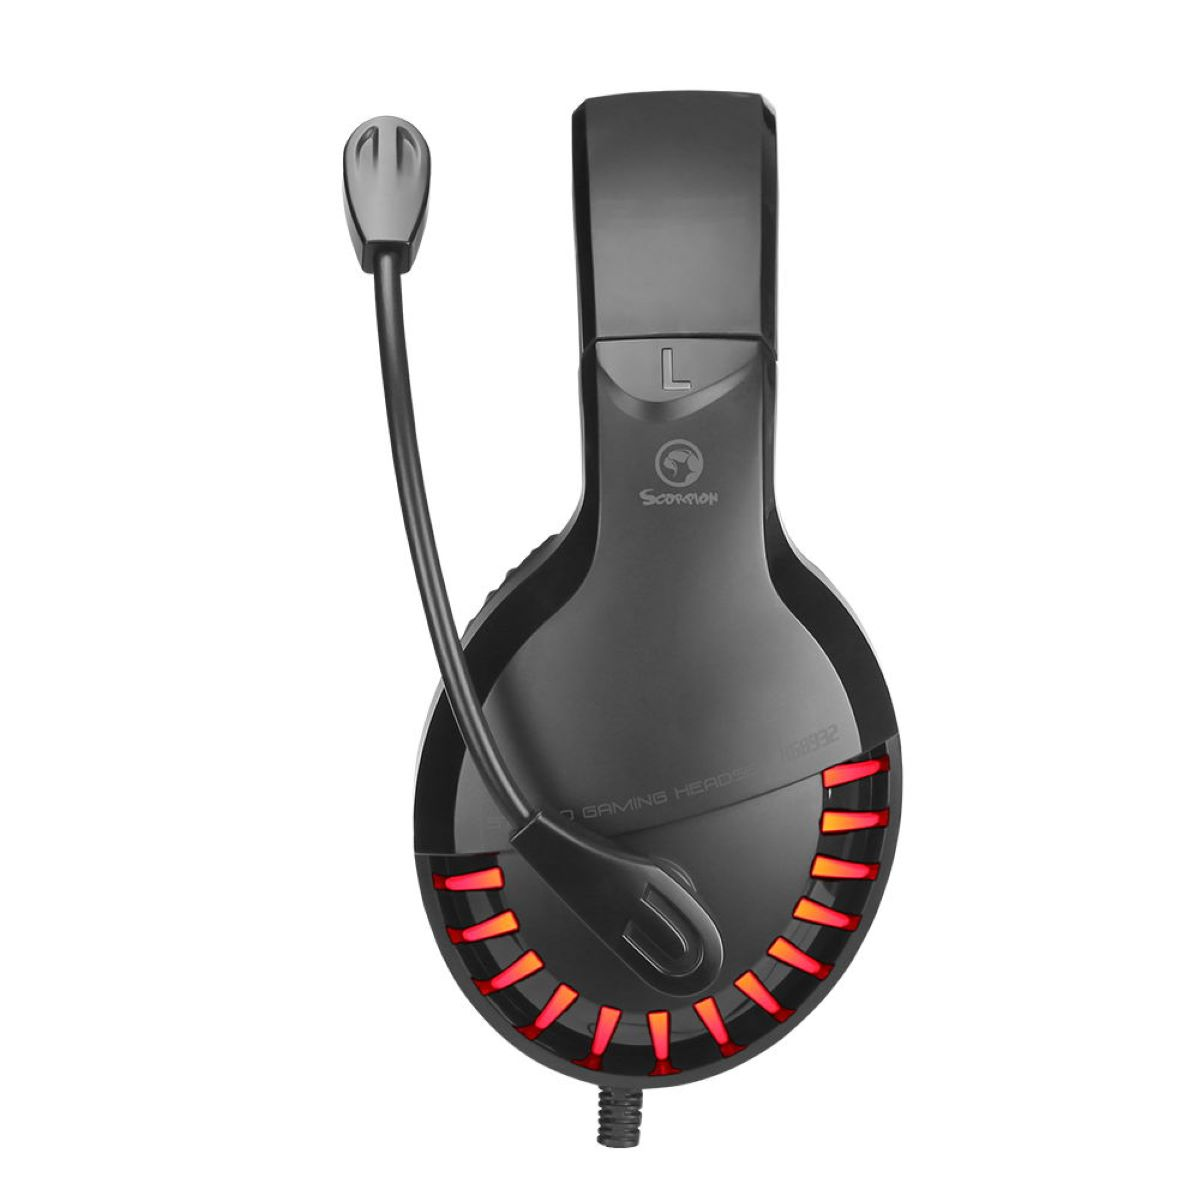 MARVO HG8932 Wired, Over-ear schwarz/rot Gaming Headset